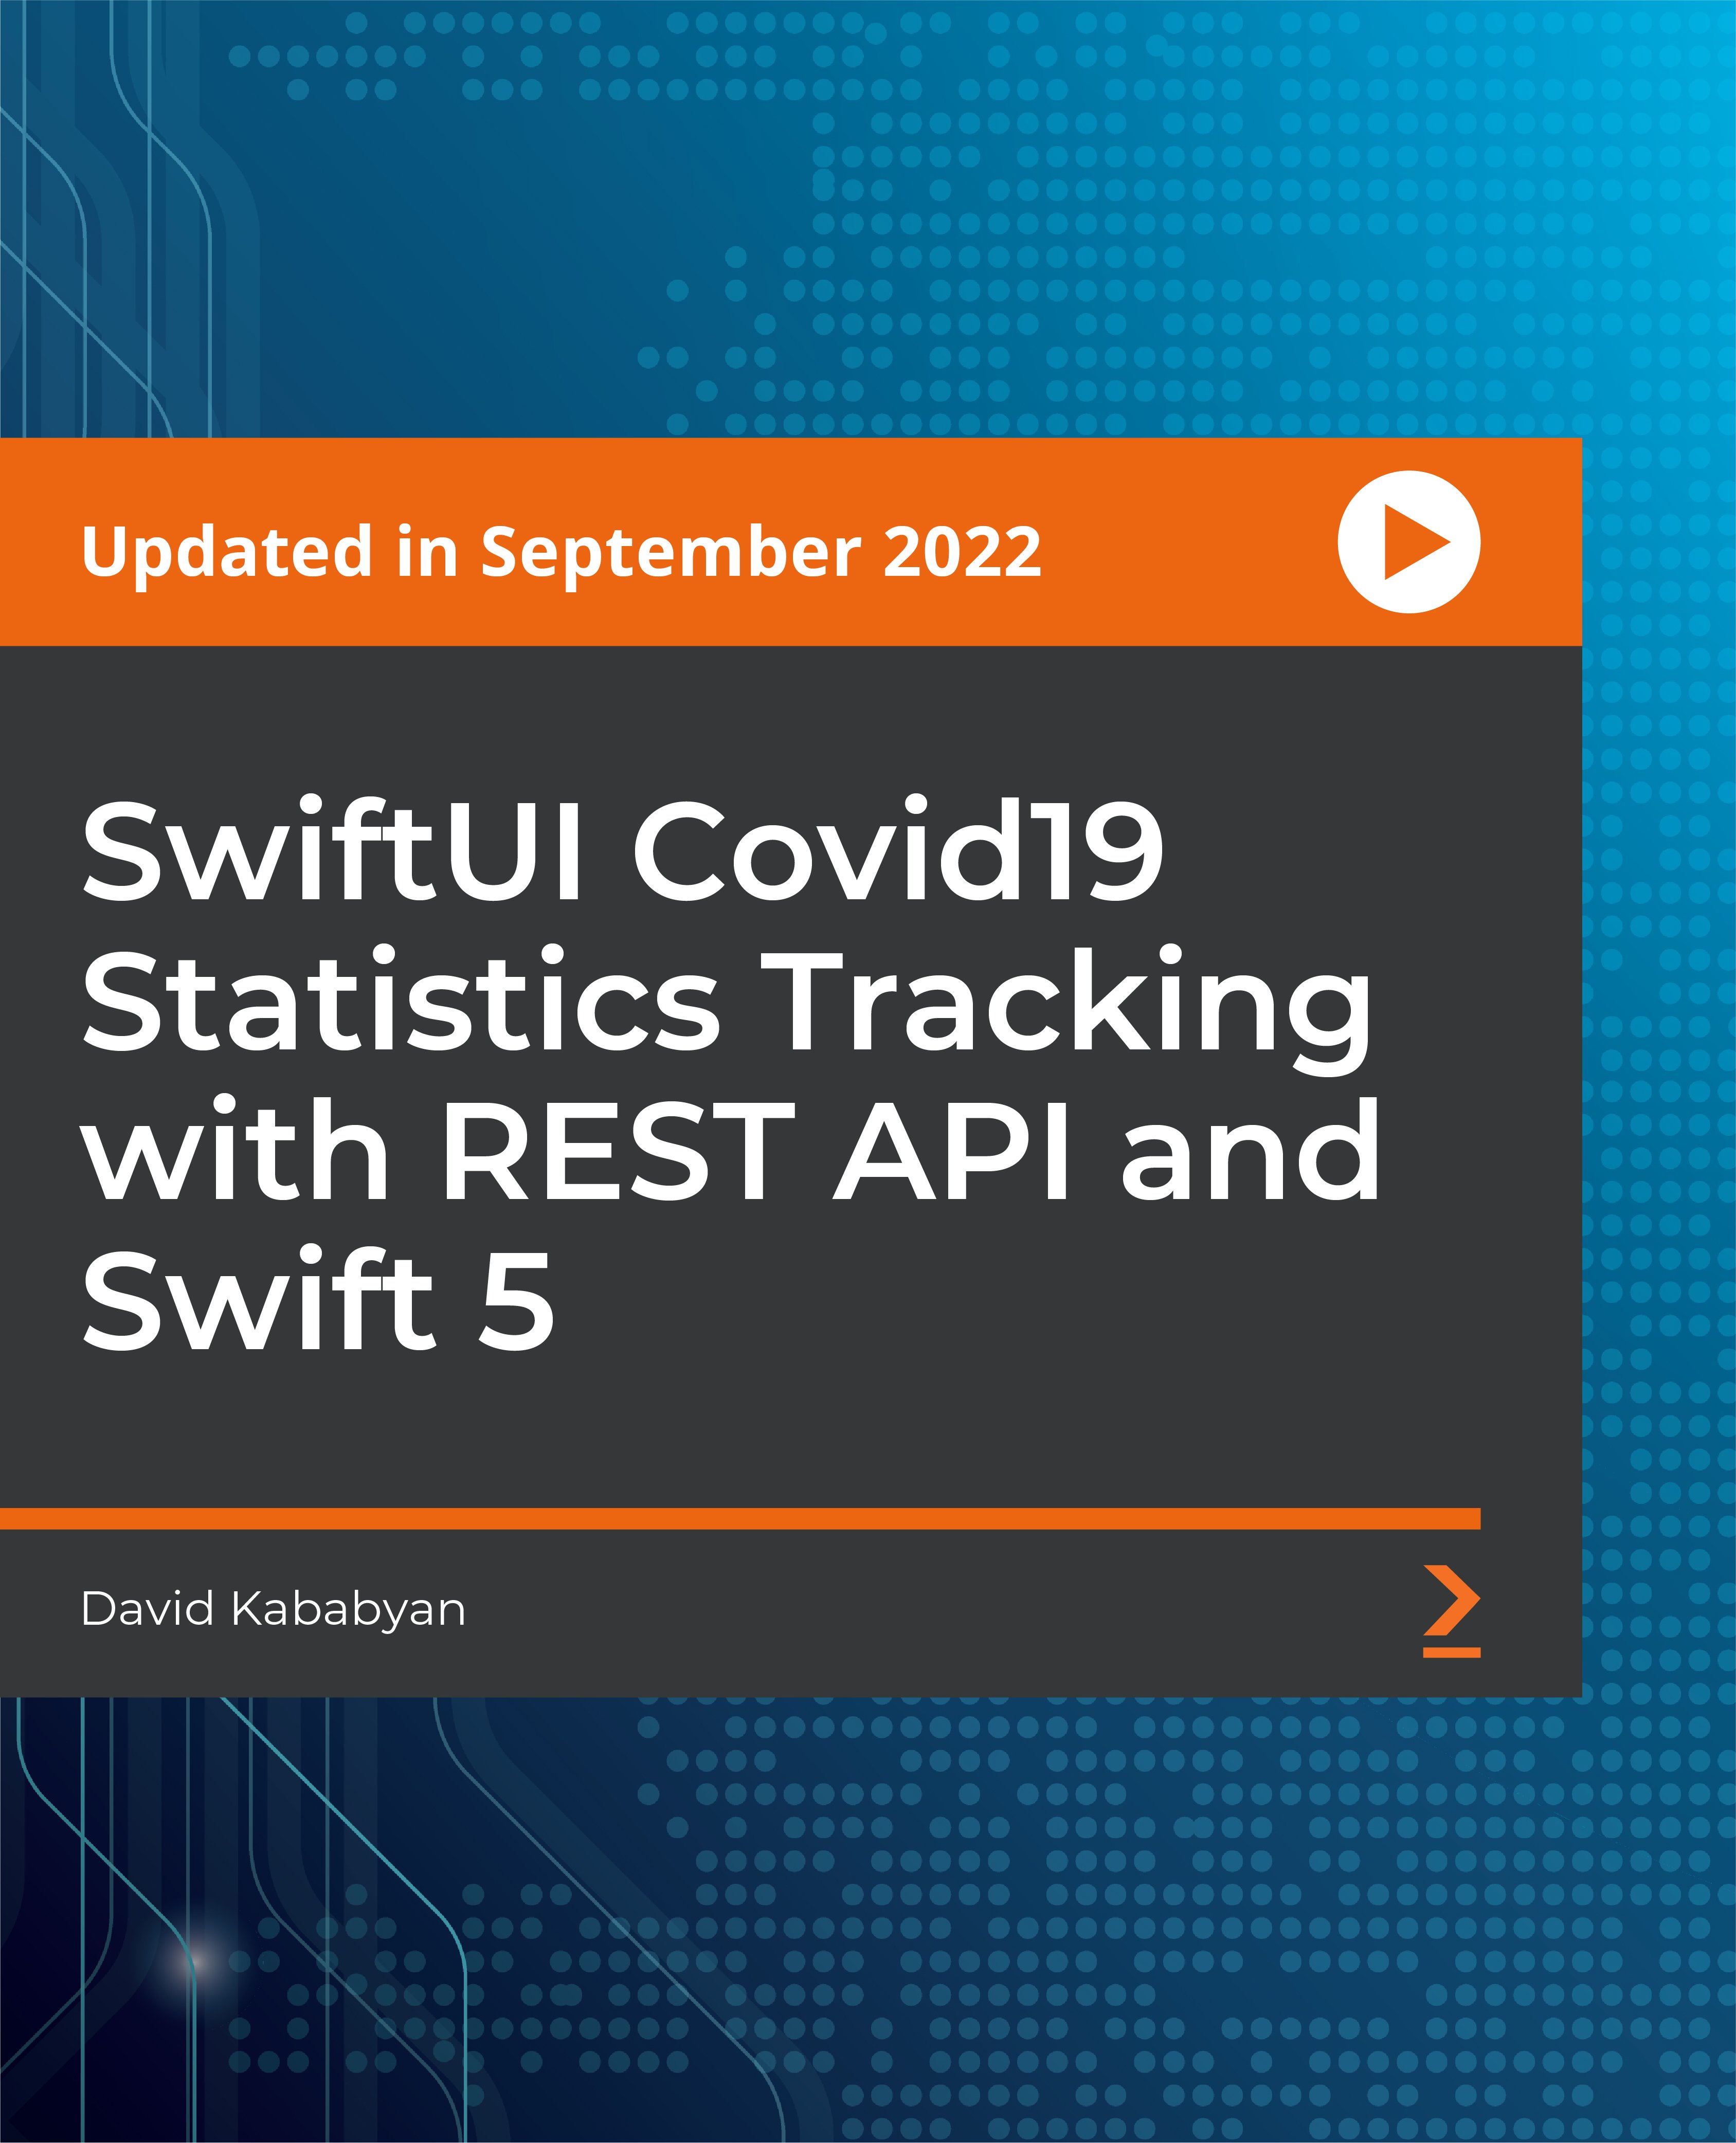 SwiftUI Covid19 Statistics Tracking with REST API and Swift 5